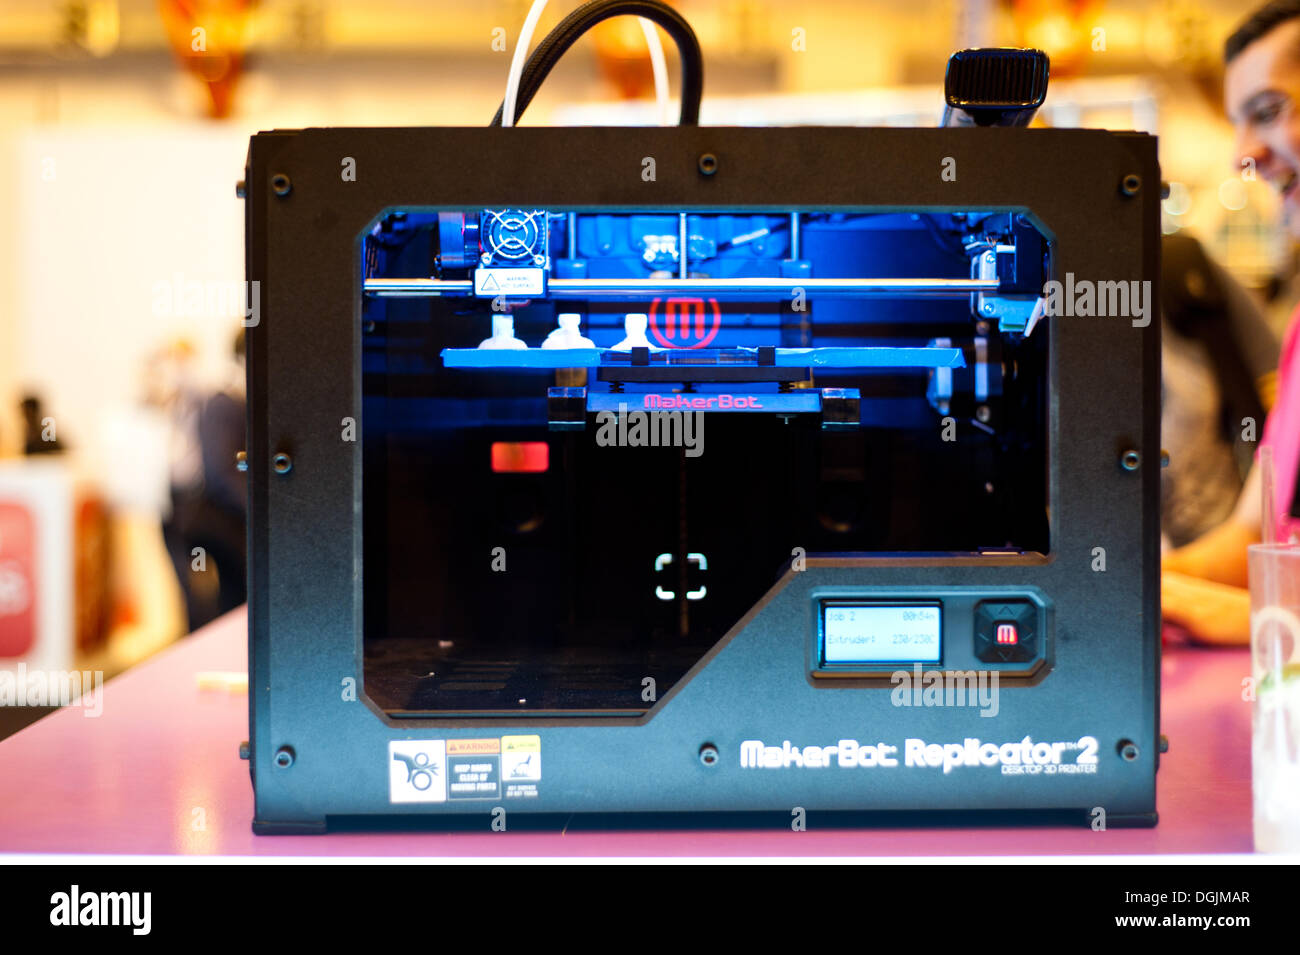 London, UK - 22 October 2013: a 3D printer during the Apps World exhibition at Earl's Court in London. Credit:  Piero Cruciatti/Alamy Live News Stock Photo